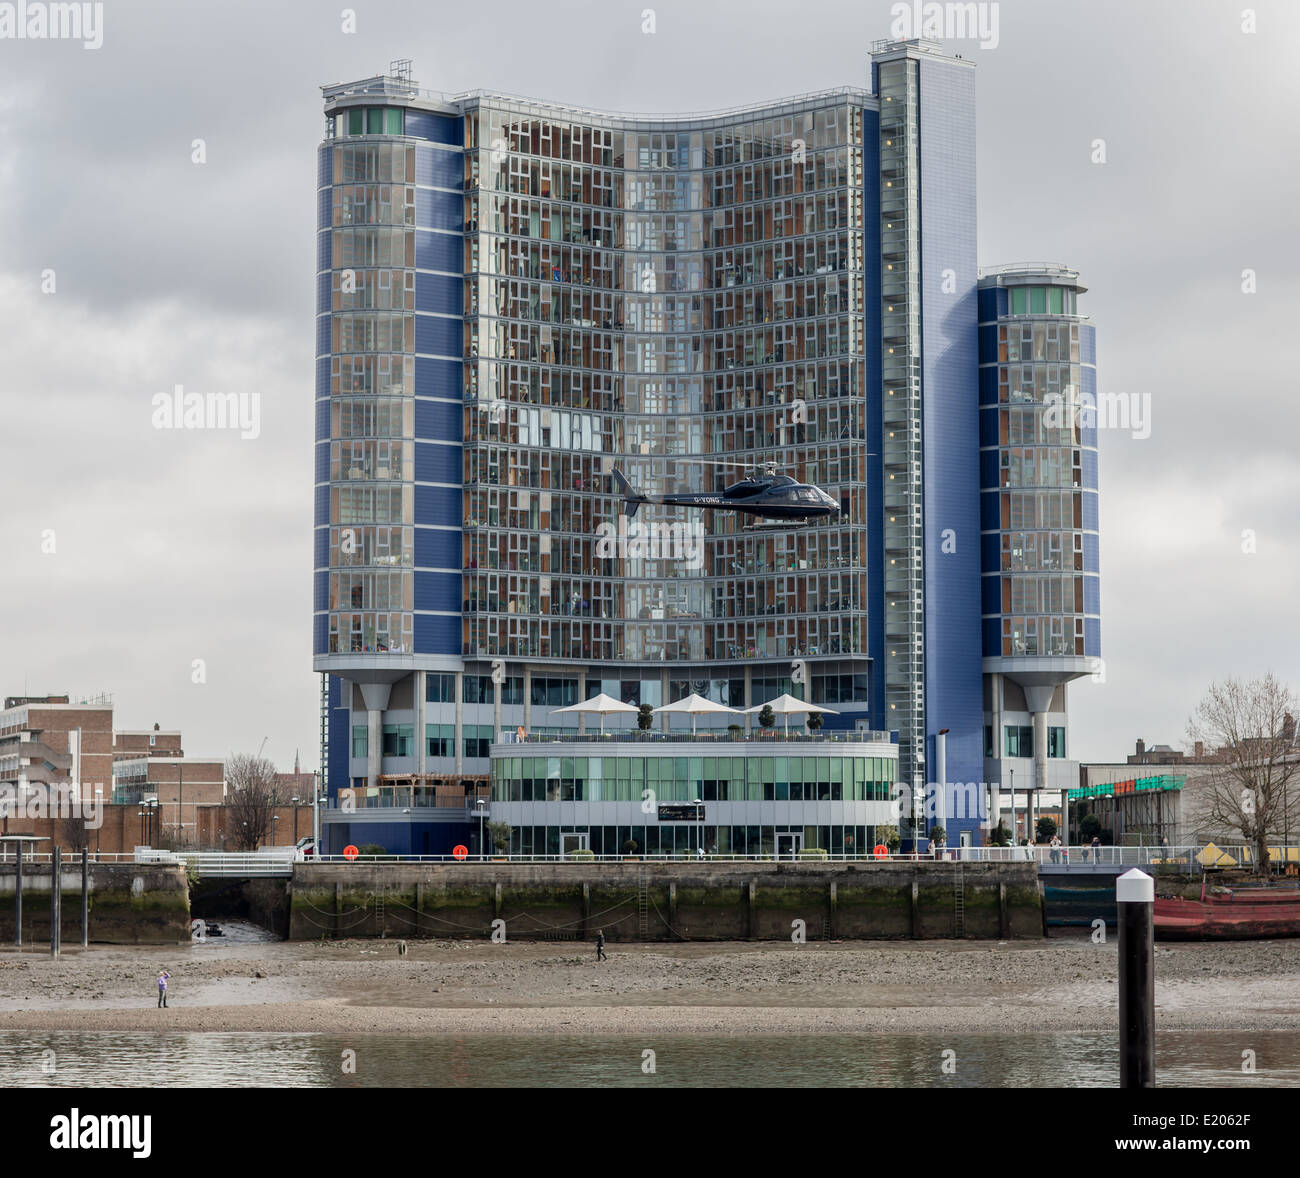 A helicopter leaving Battersea Heliport, London, and flying in front of Falcon Wharf on a cloudy day Stock Photo